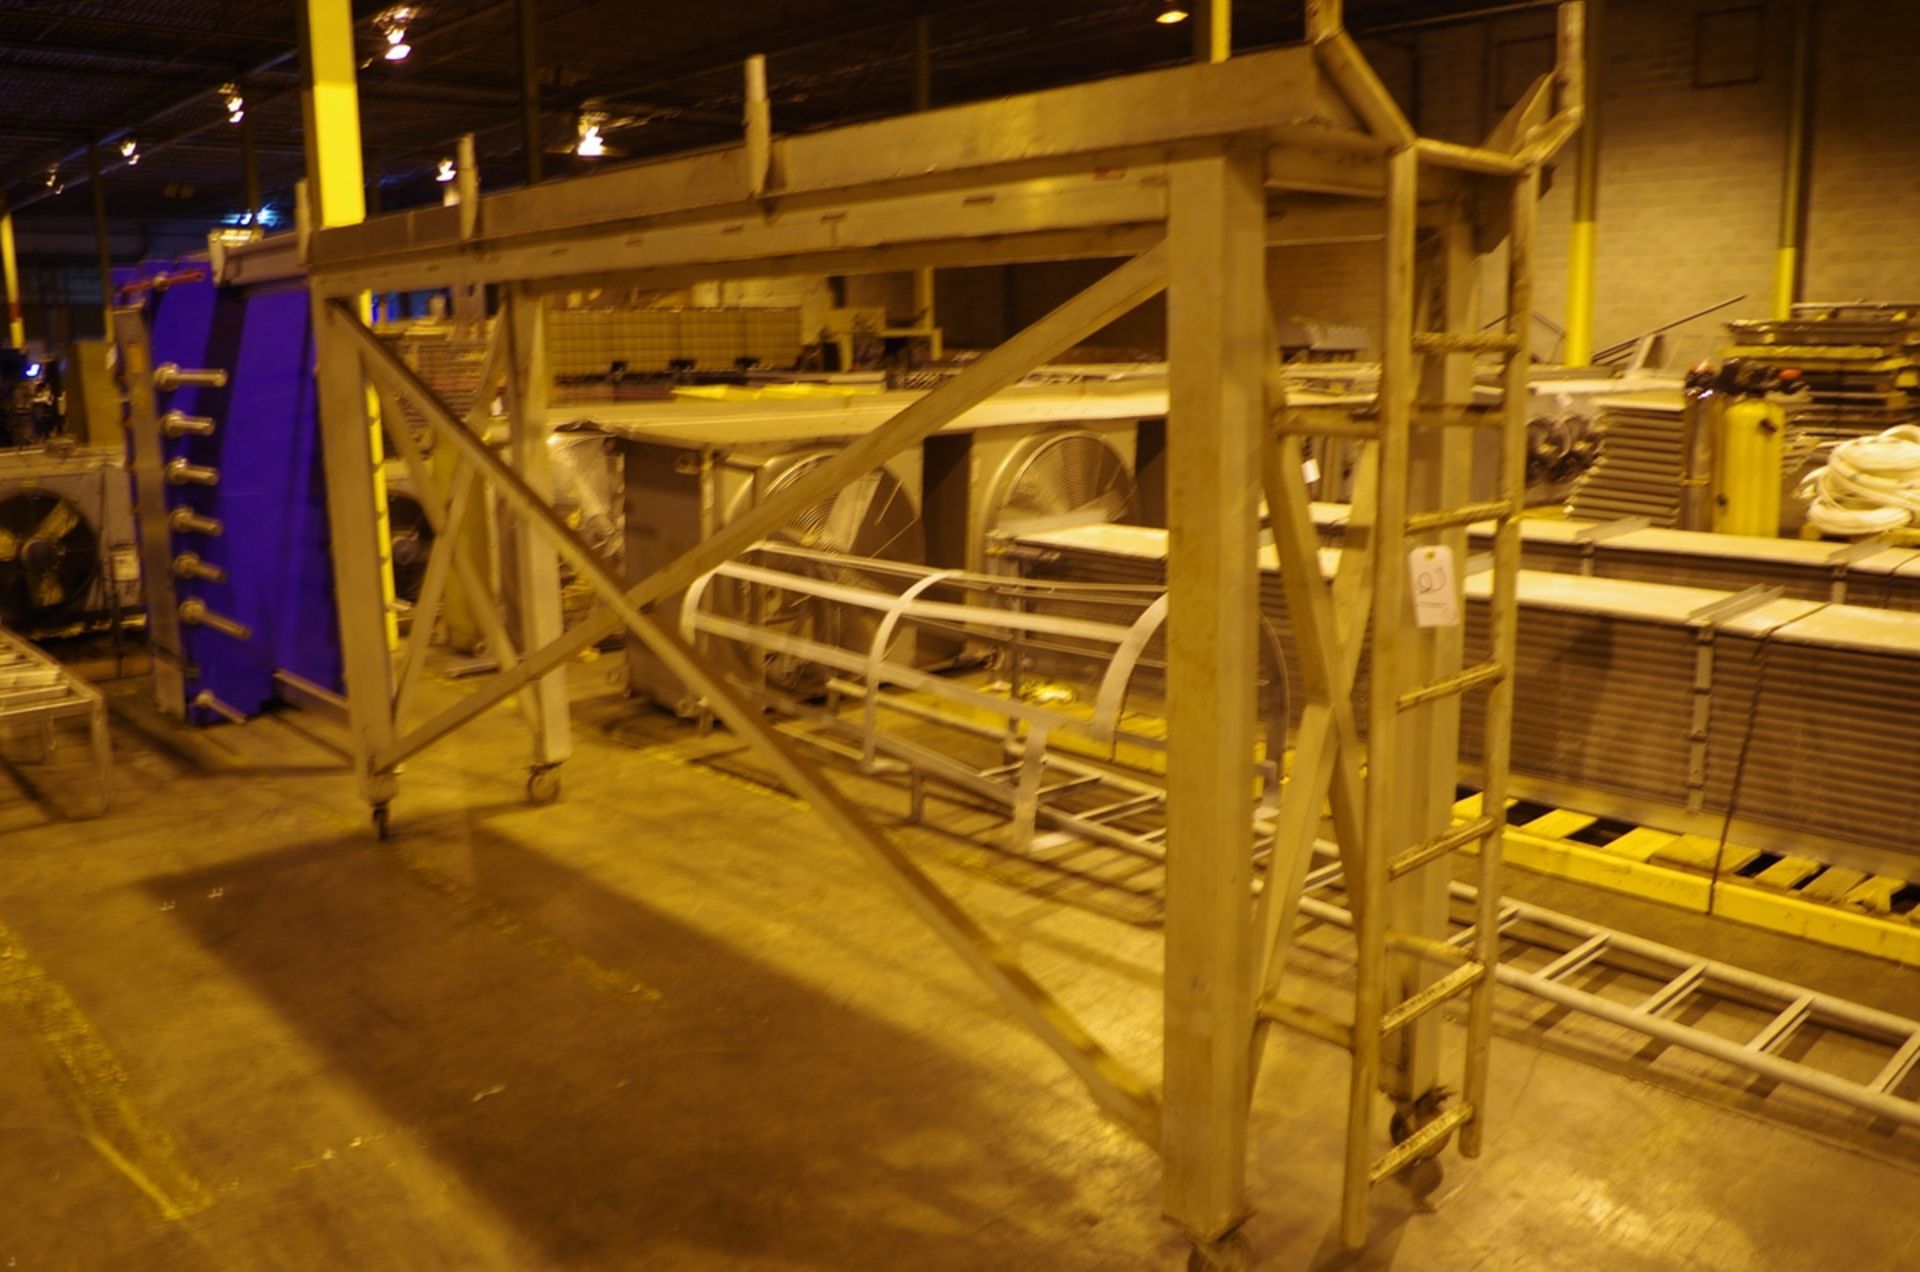 Stainless Steel Rolling Walkway with Ladder, approx. 7' H x 3' W x 13' L, and Stain | Rig Fee: $50